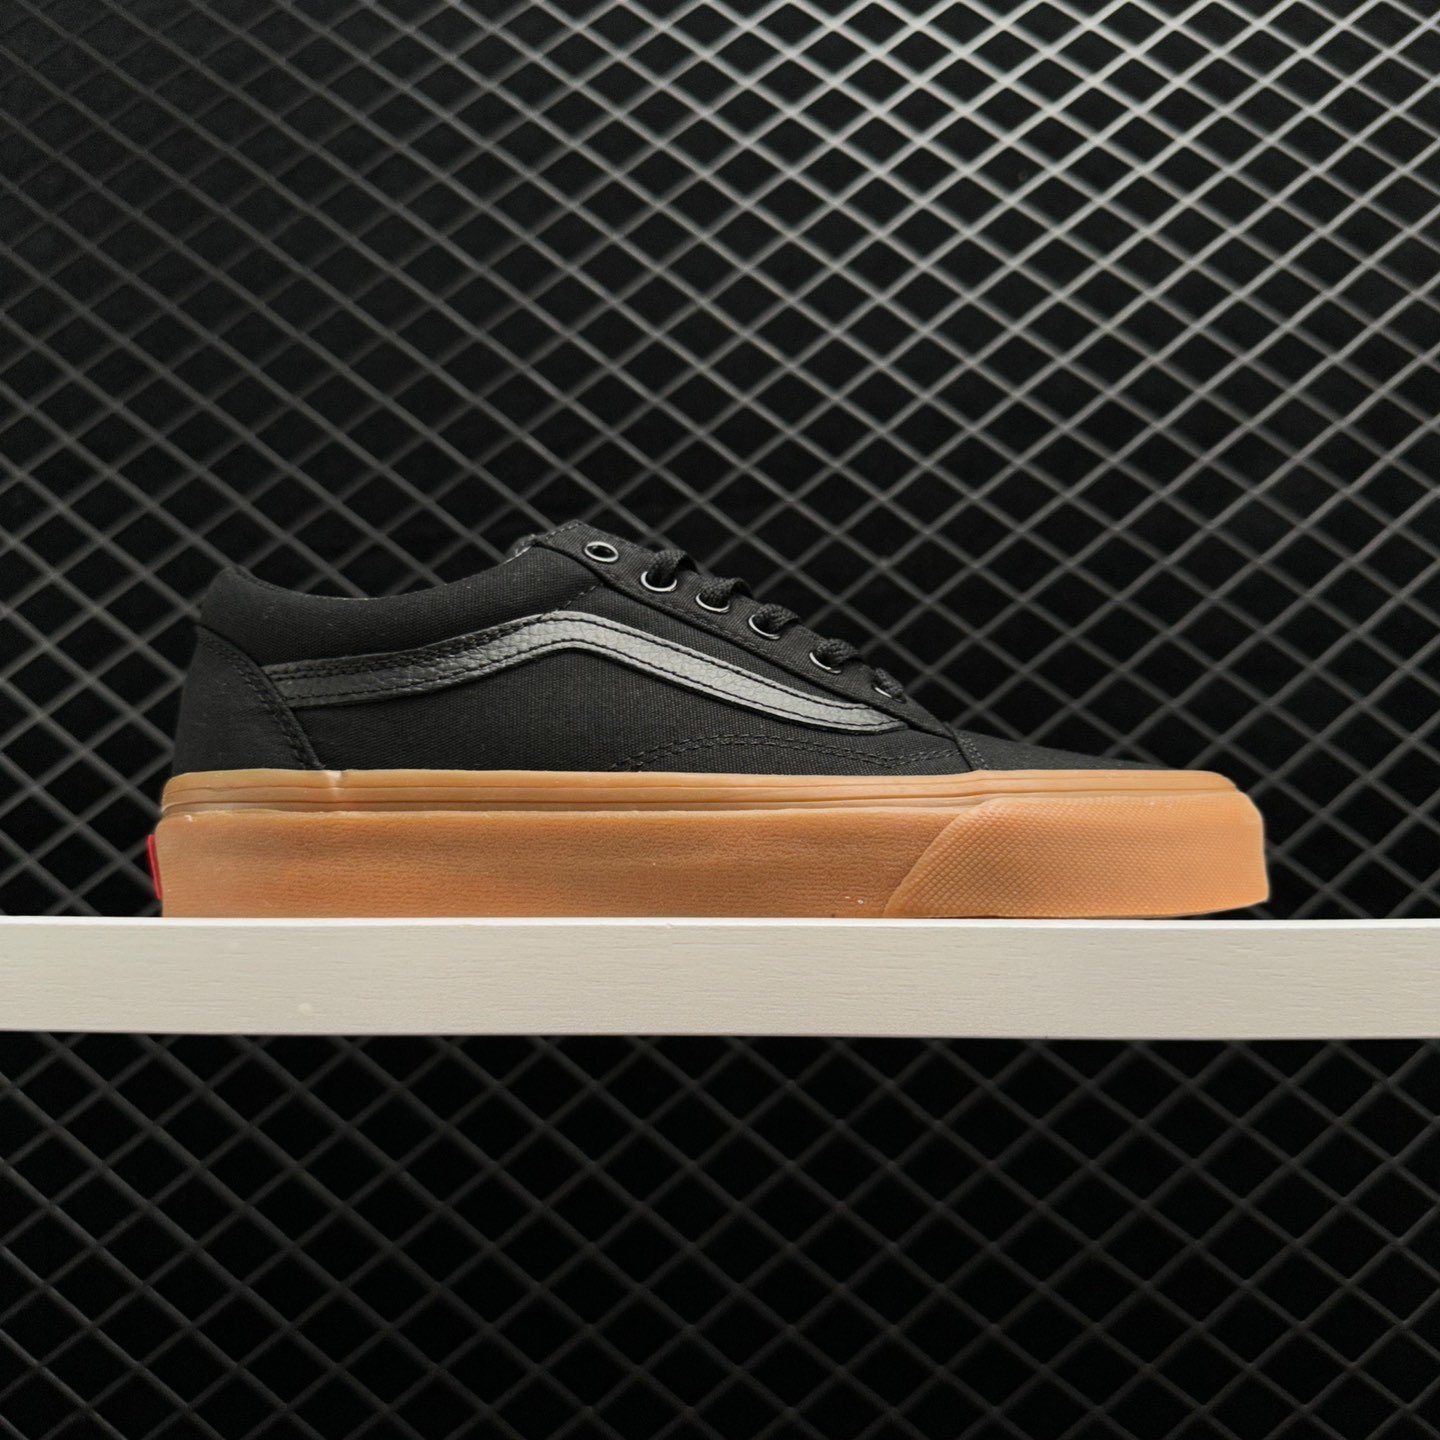 Vans Old Skool Sneakers Black - Classic Style and Timeless Appeal